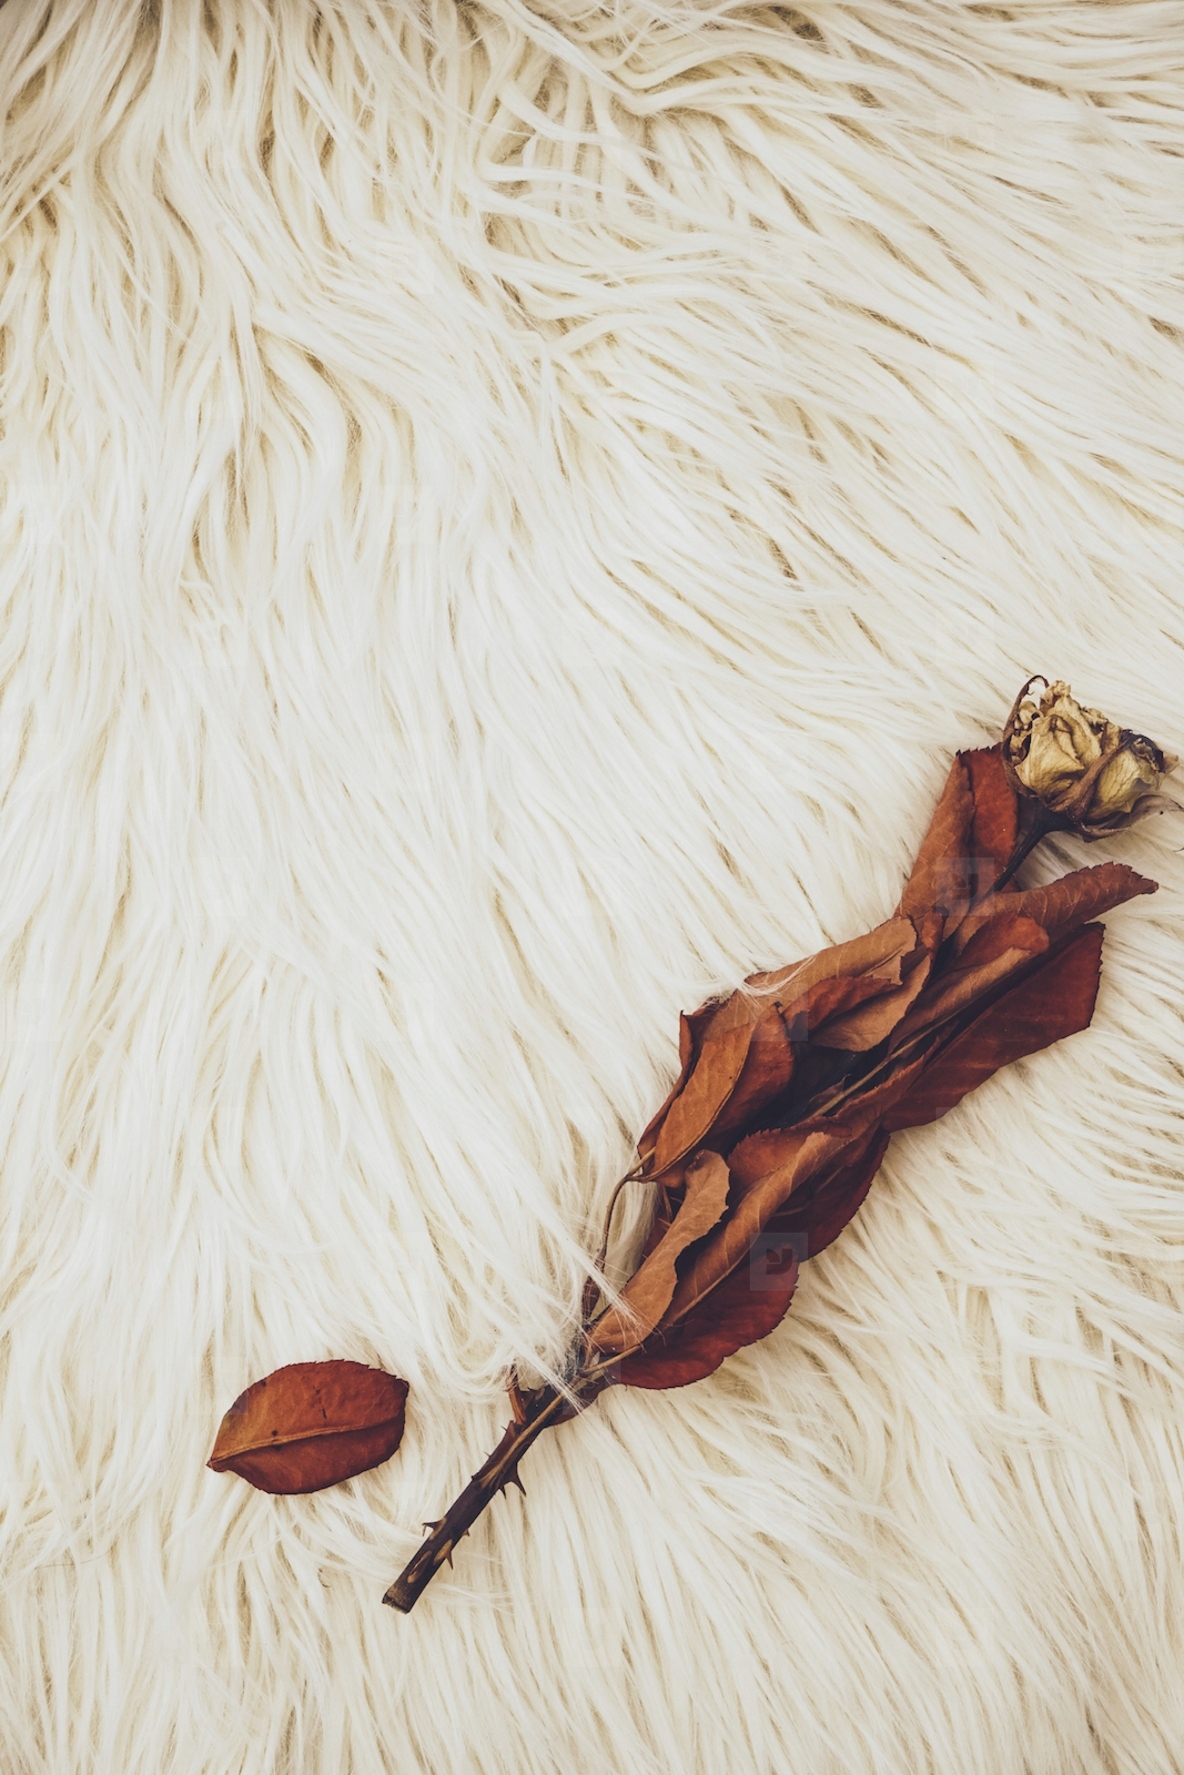 Background image of a dried rose over a soft carpet